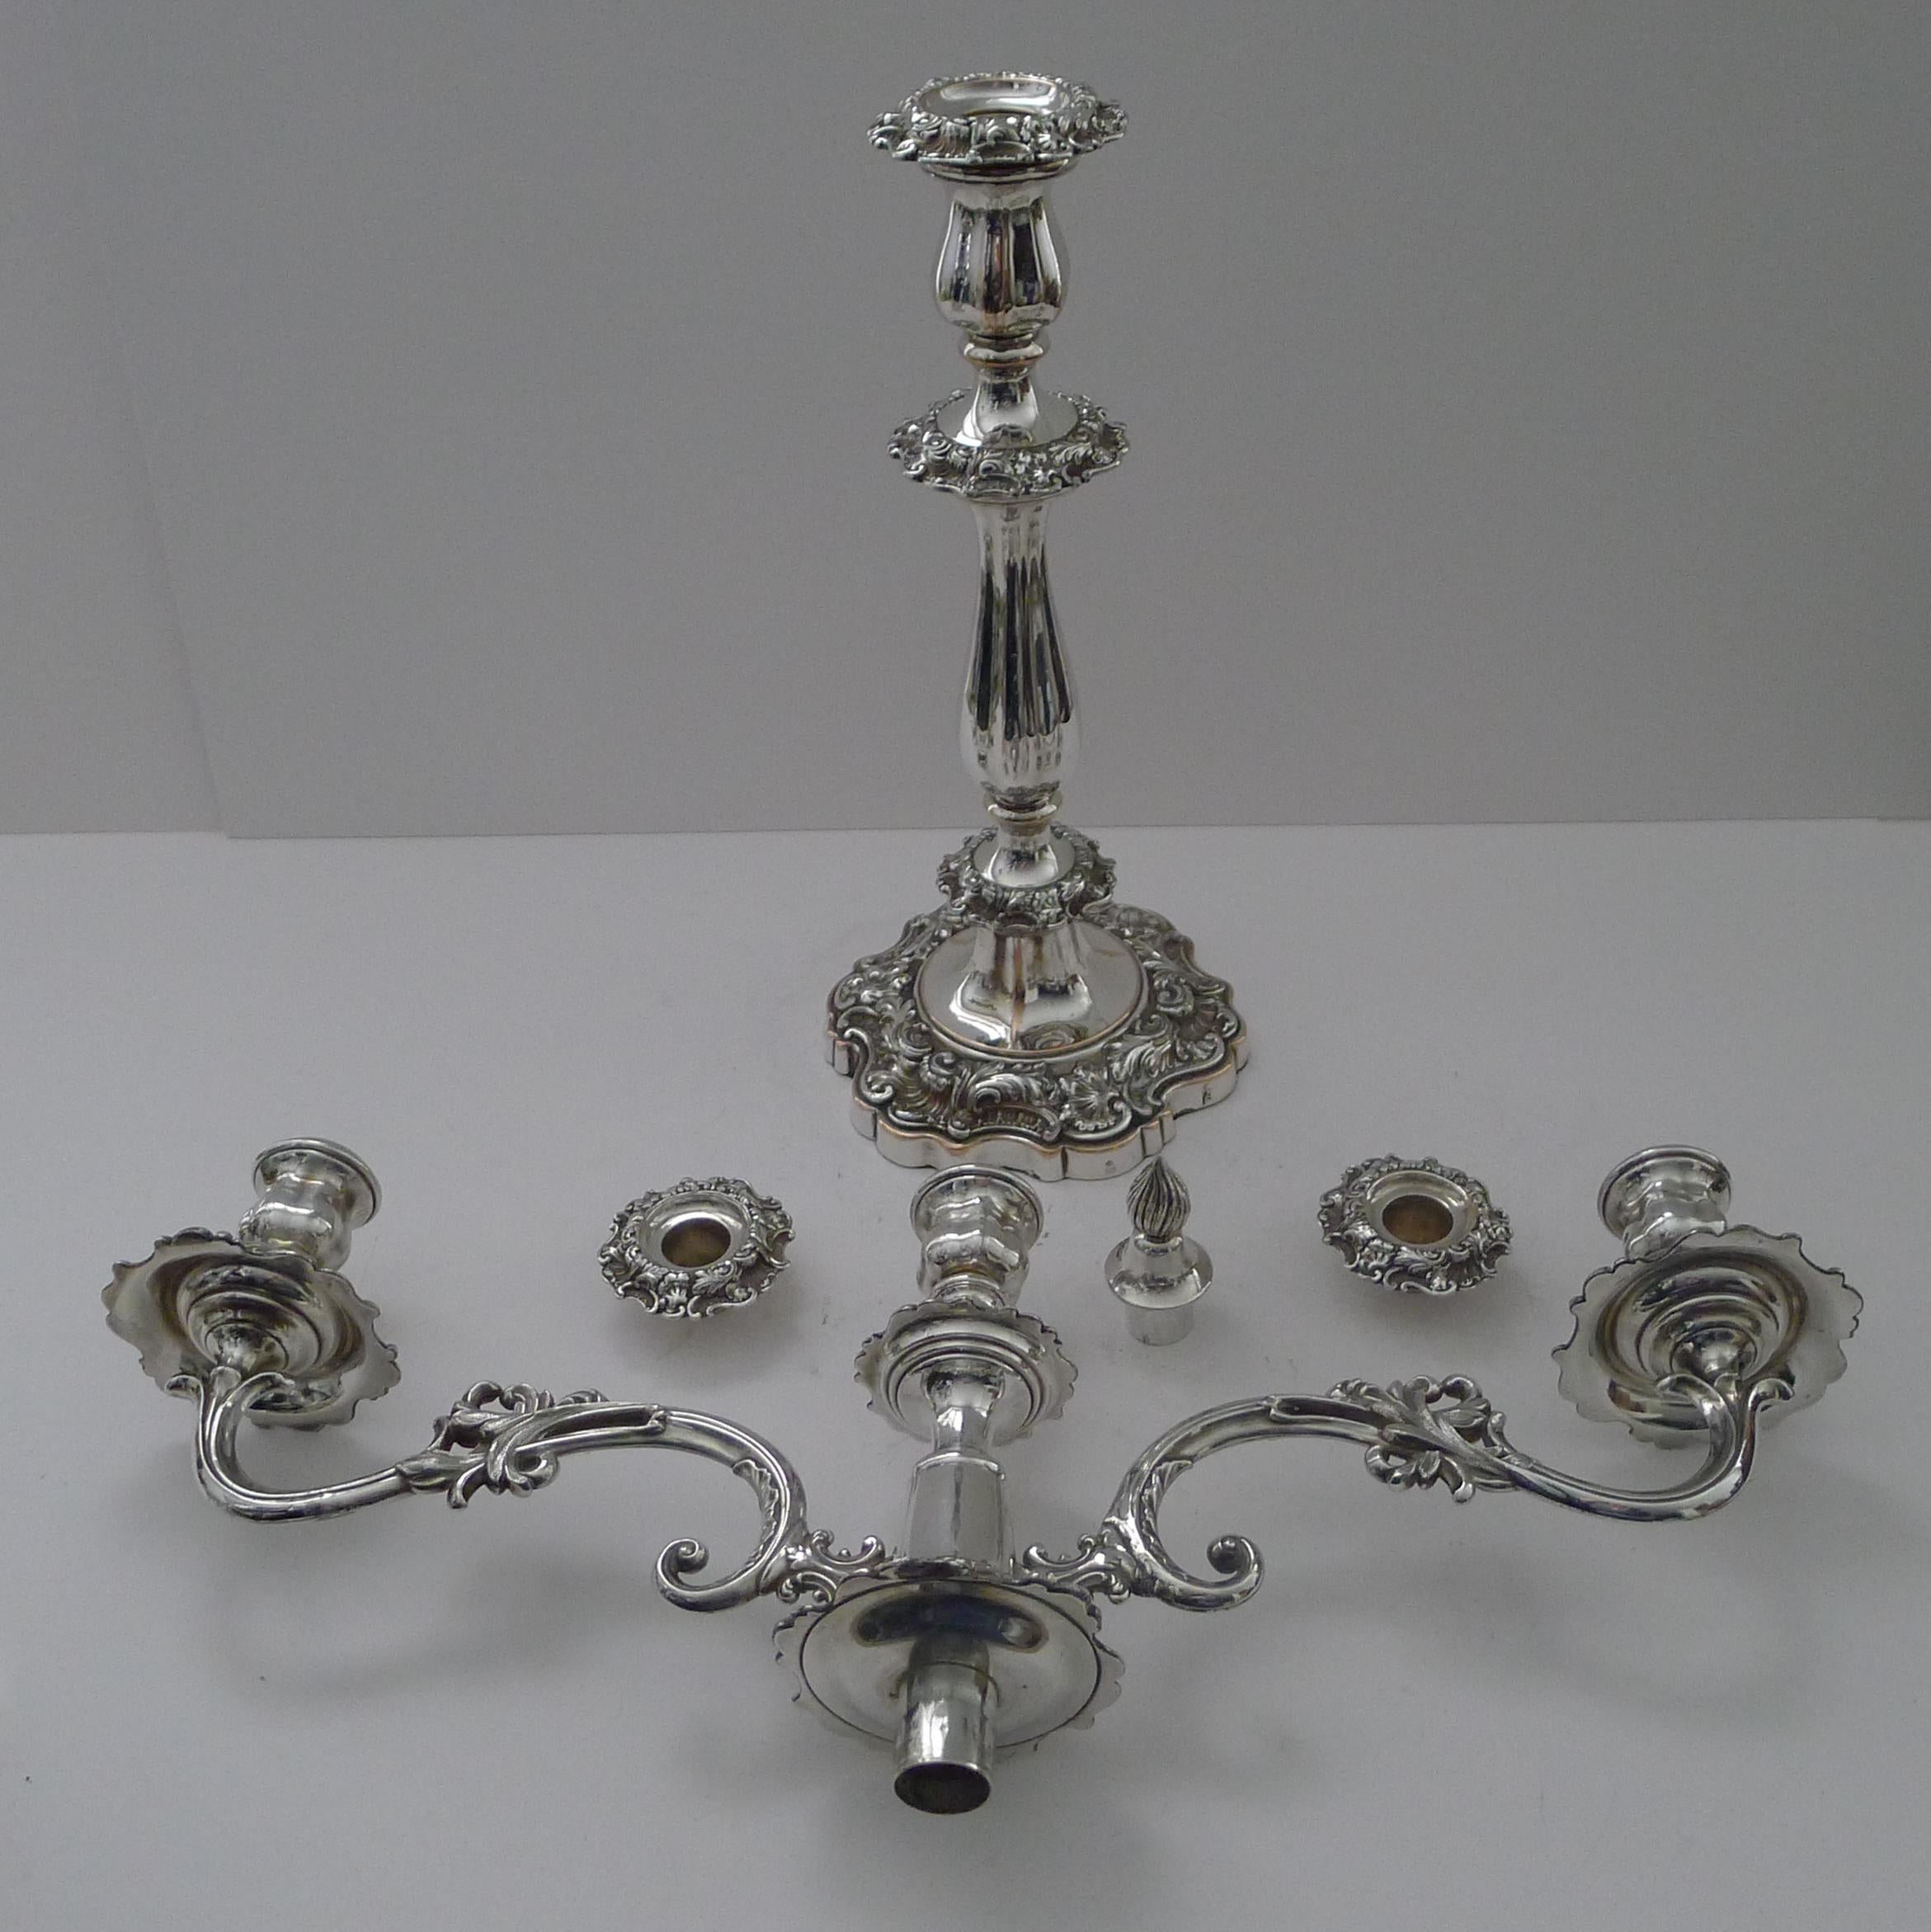 Grand Pair Old Sheffield Plate Candelabra by Blagden, Hodgson & Co. For Sale 3